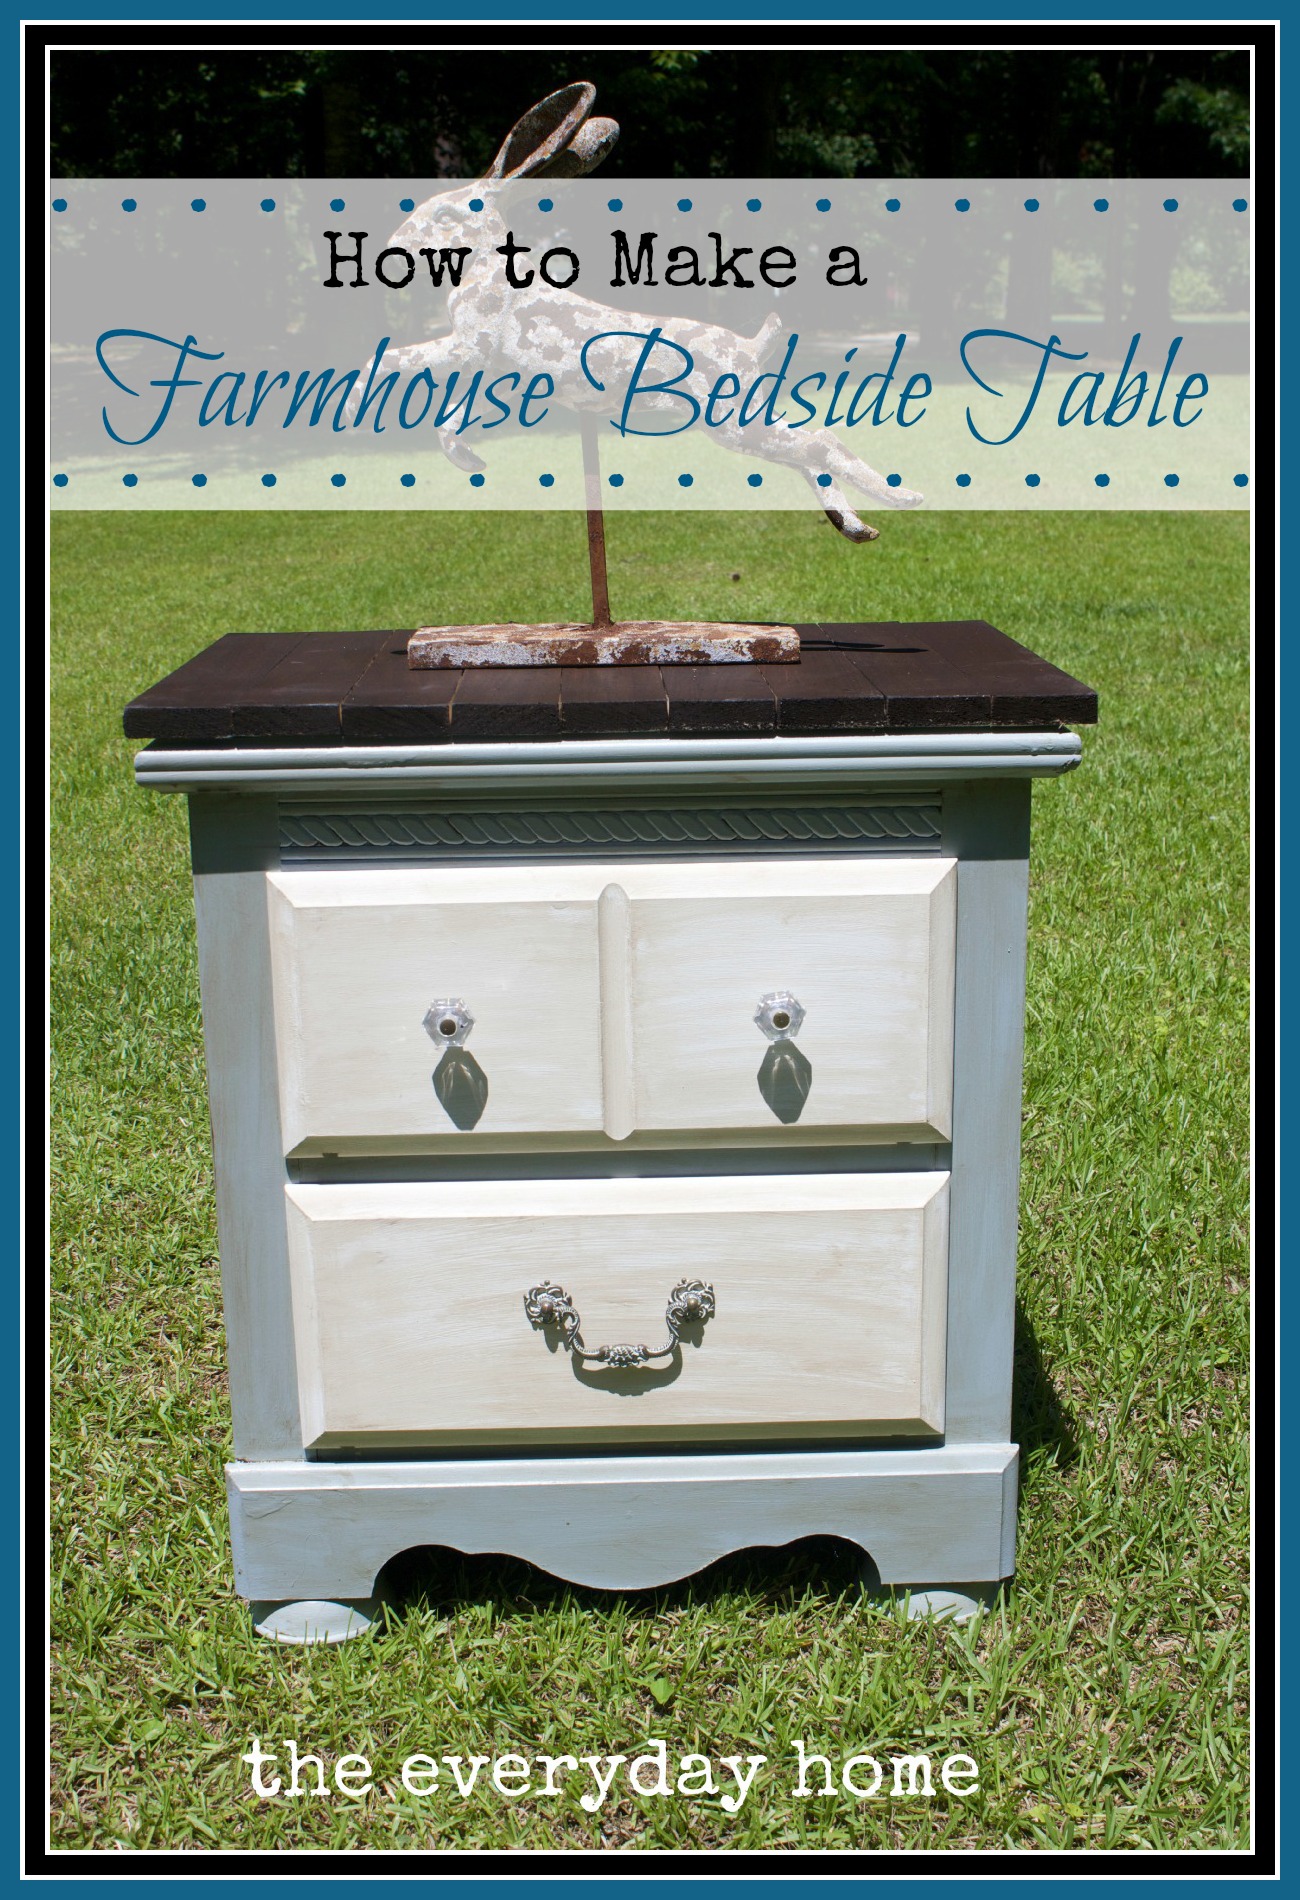 Farmhouse-Bedside-Table-Update-by-The-Everyday-Home-www.everydayhomeblog.com_